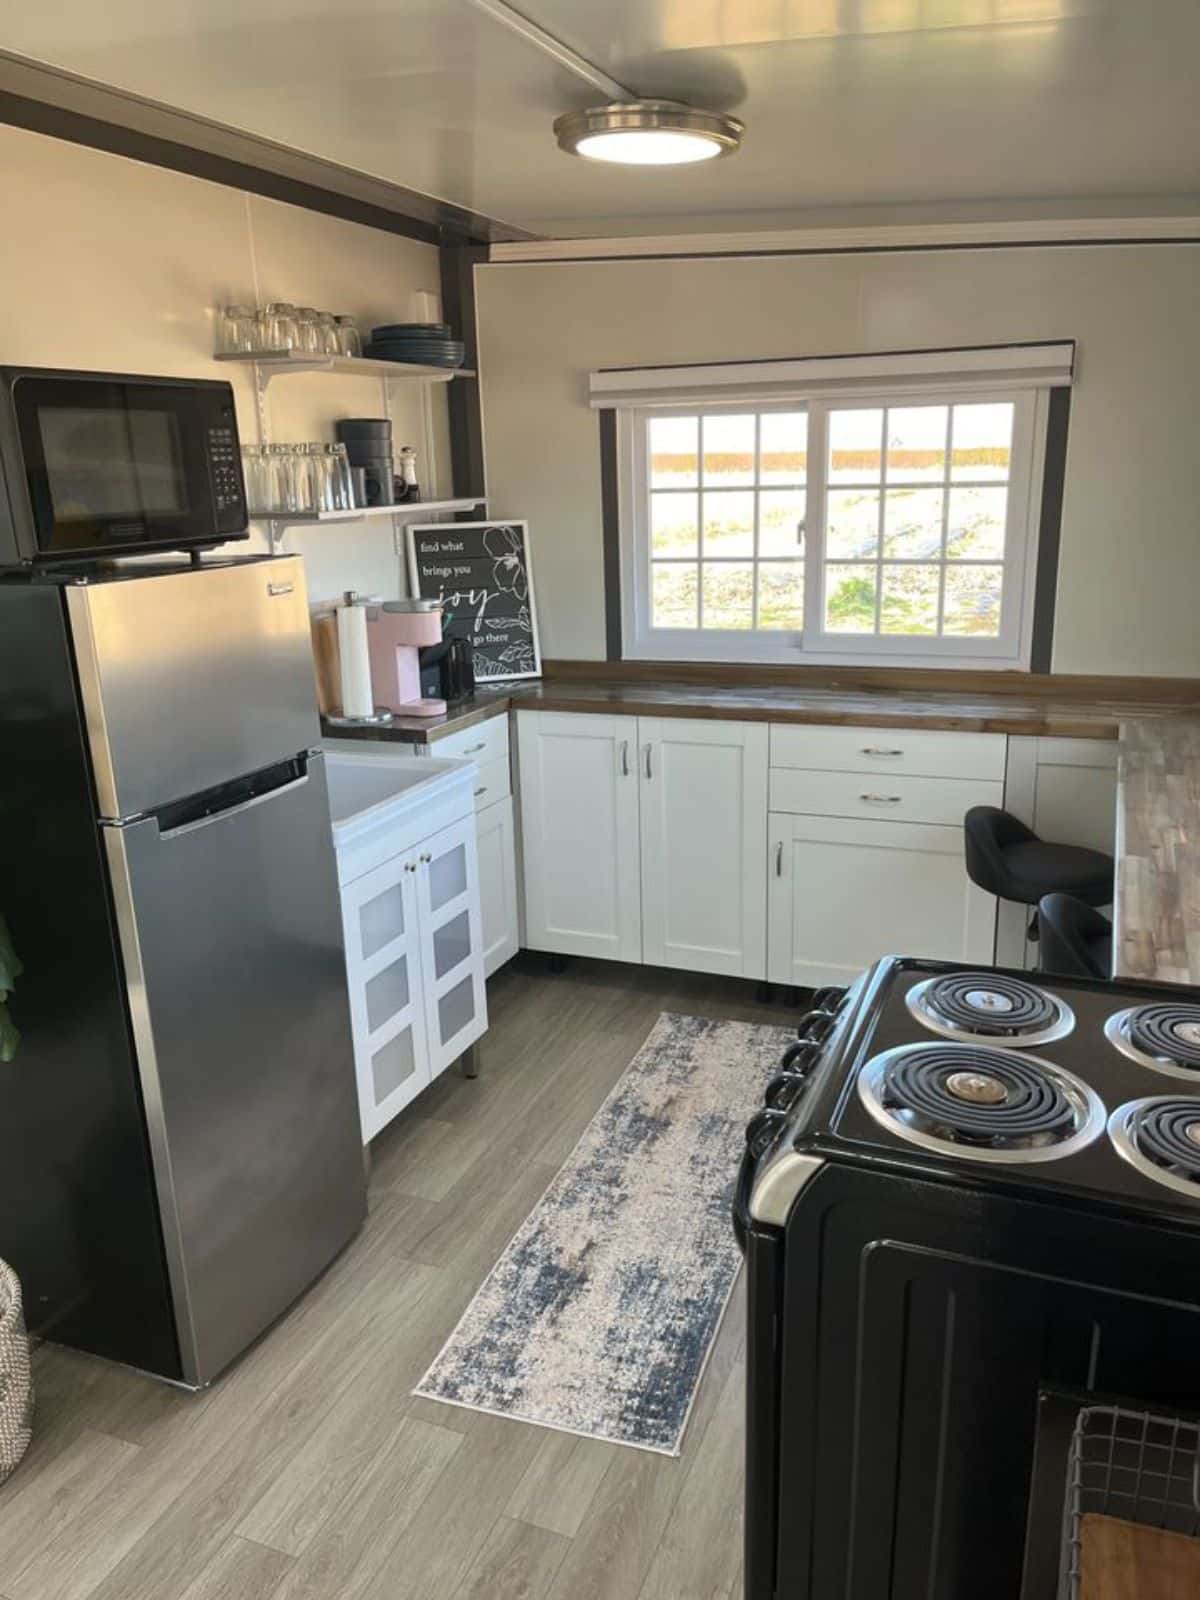 Huge counter top with storage cabinets and stove on the other side of kitchen